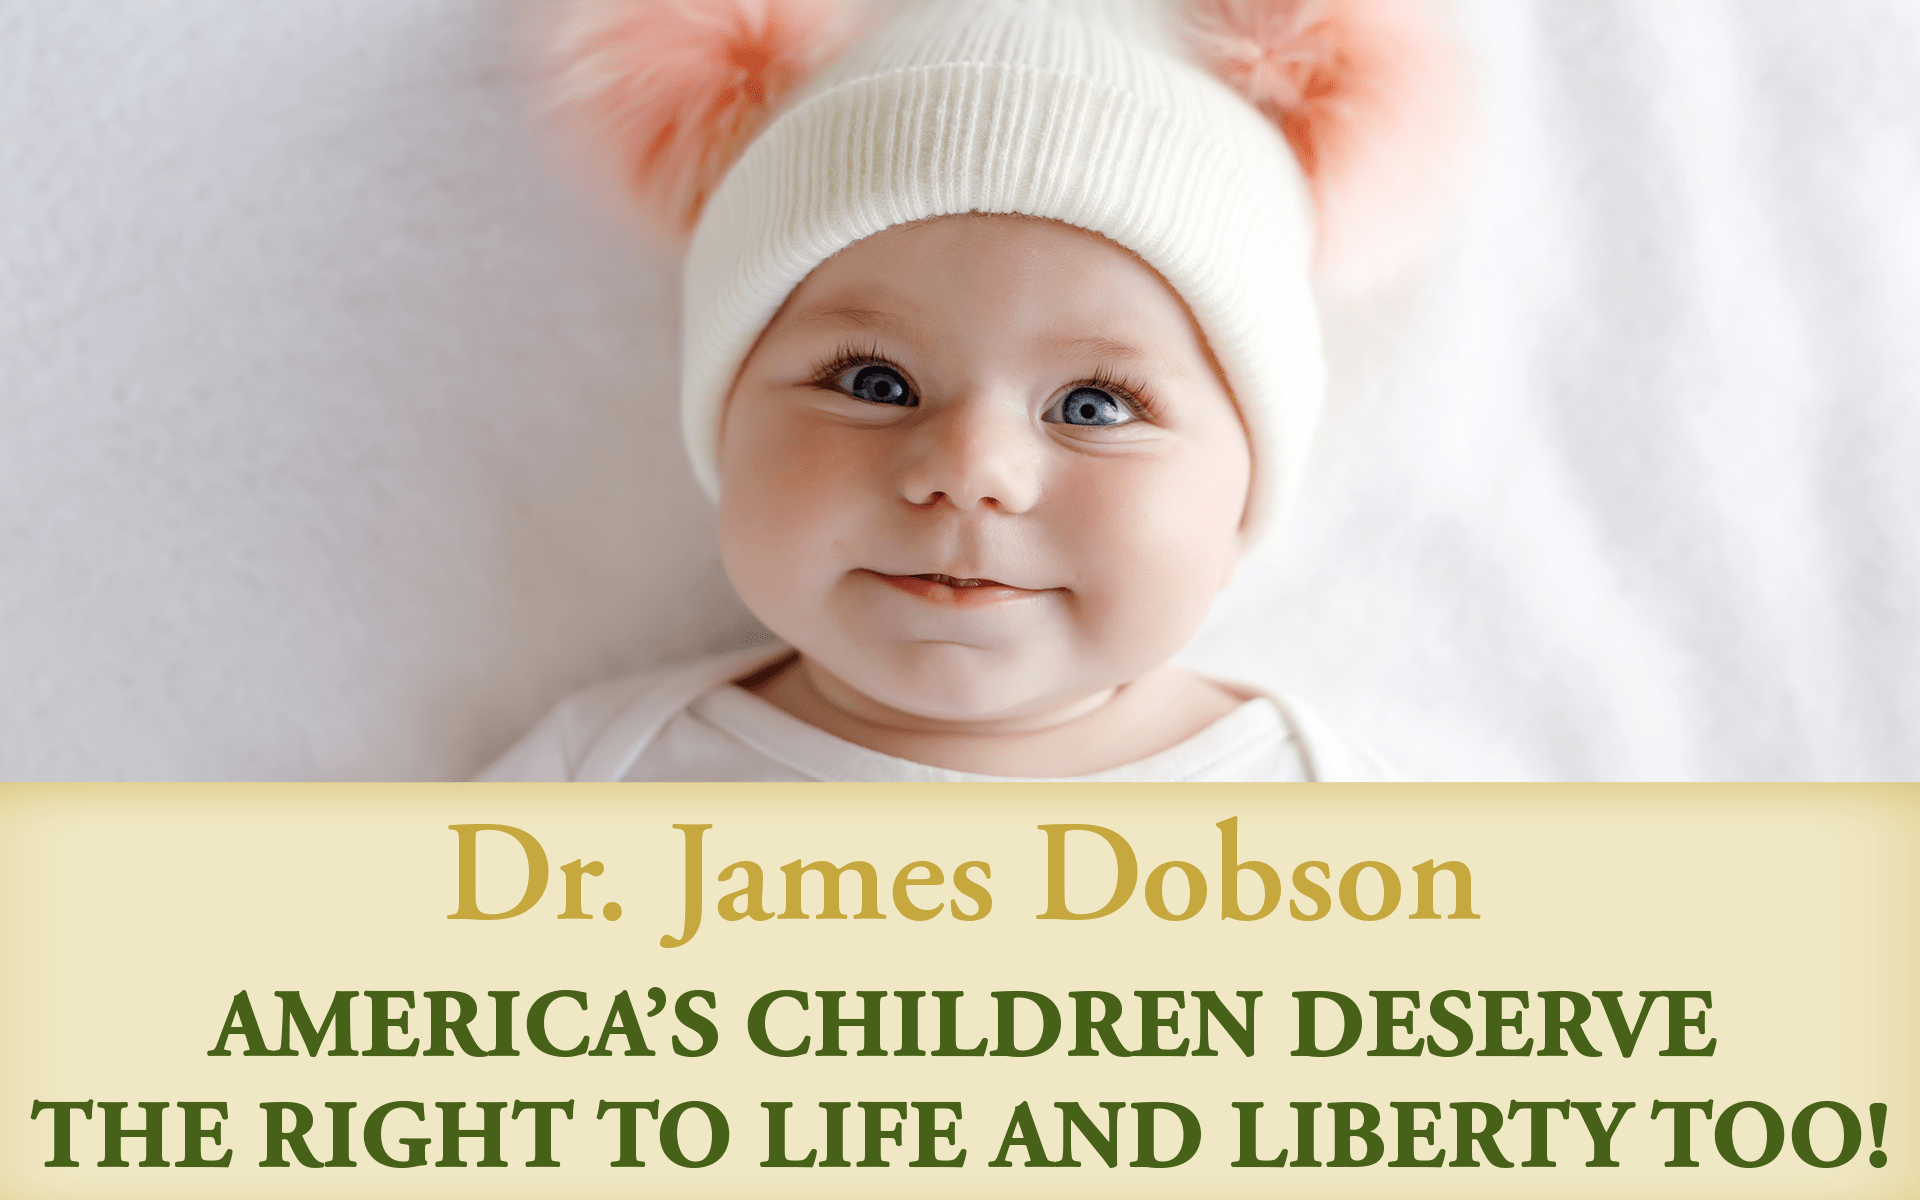 America's Children Deserve the Right to Life and Liberty Too!